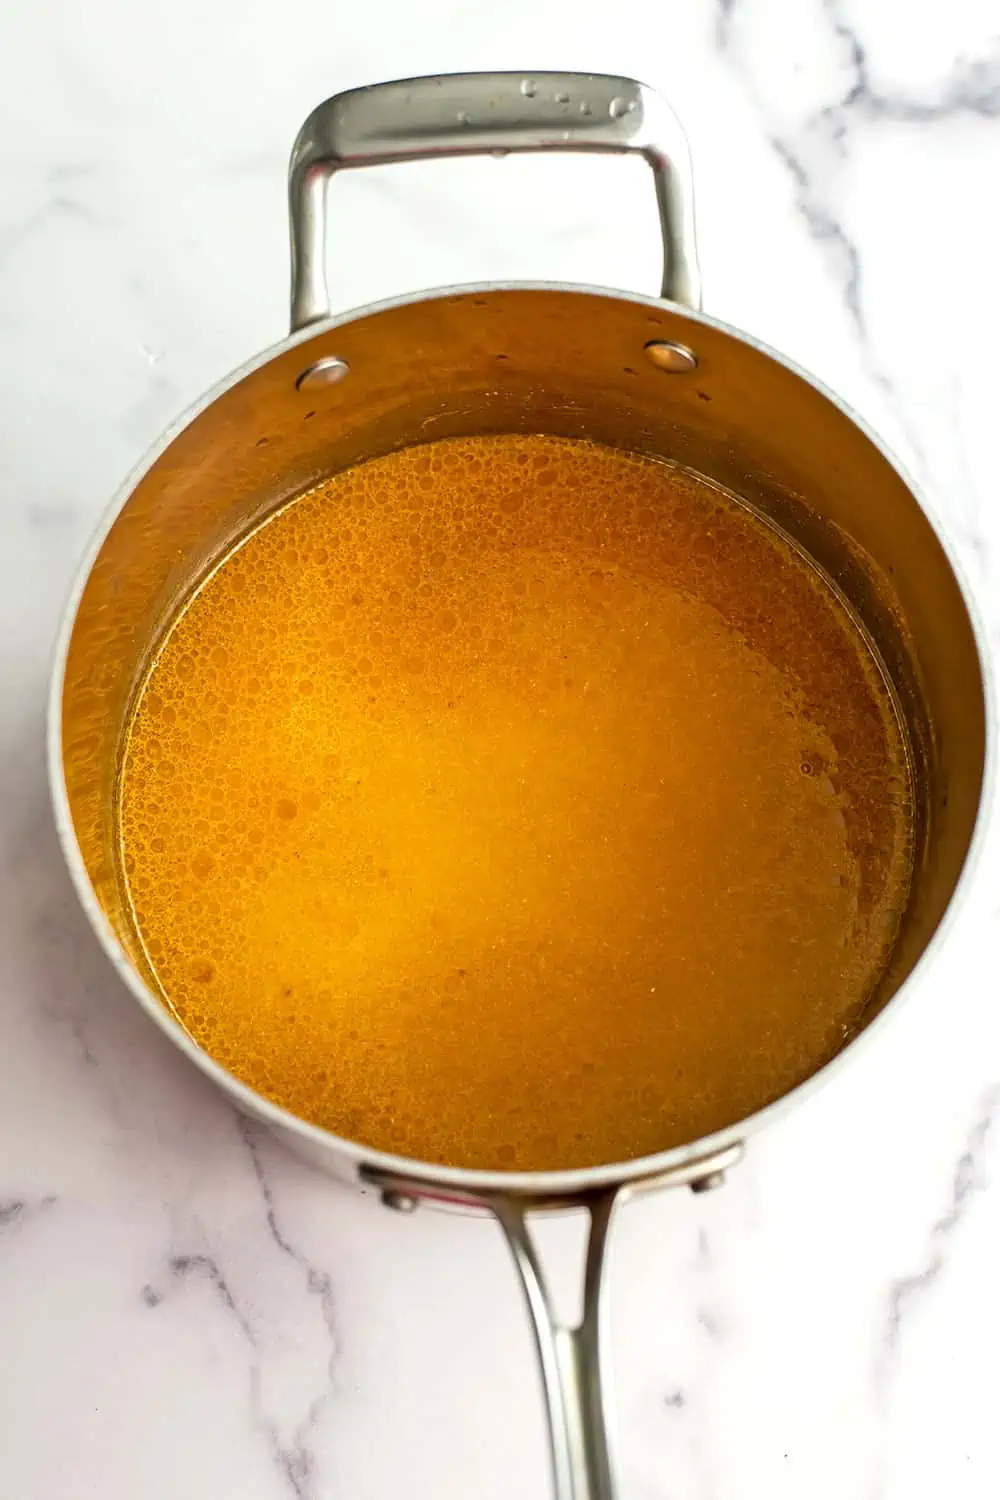 Turmeric and garlic powder dissolved in water in pot.